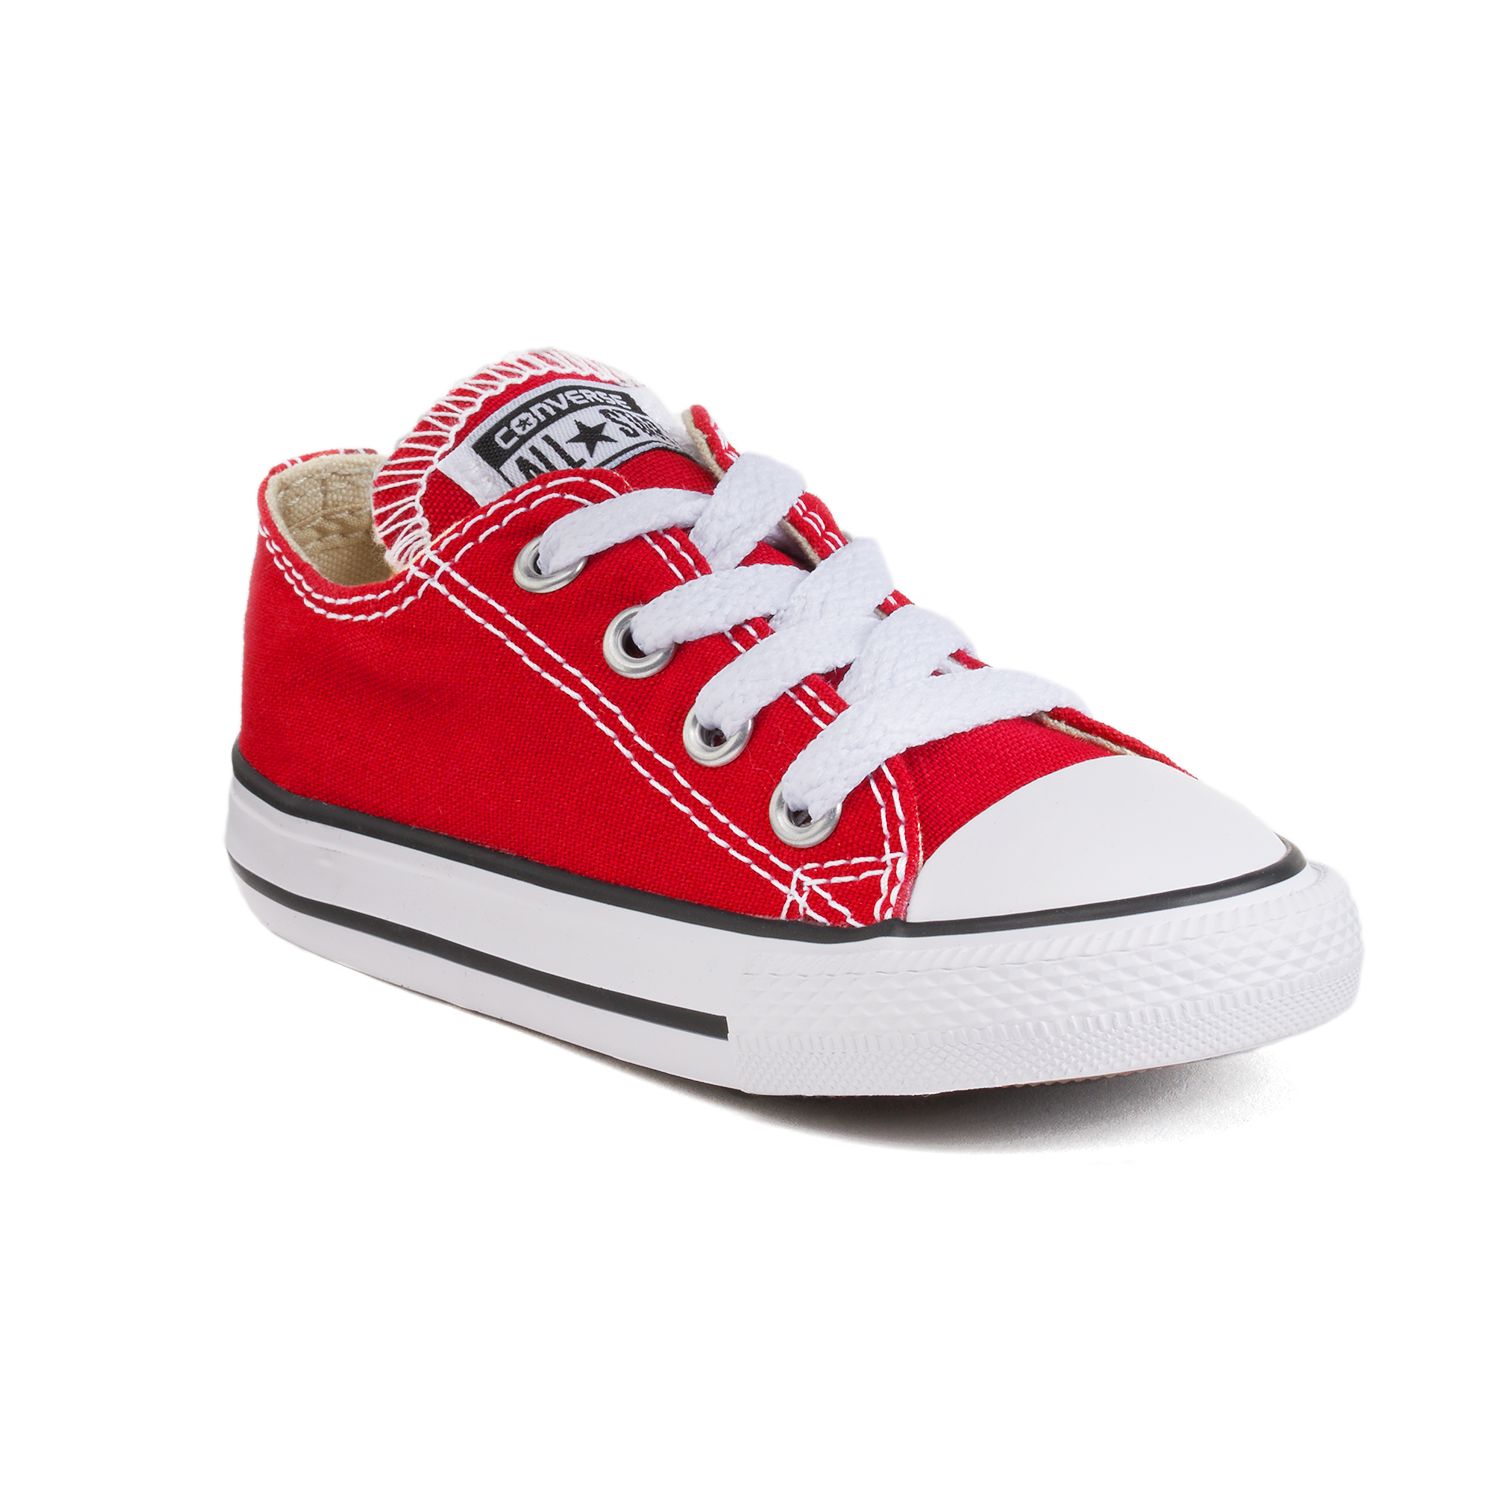 red converse shoes near me